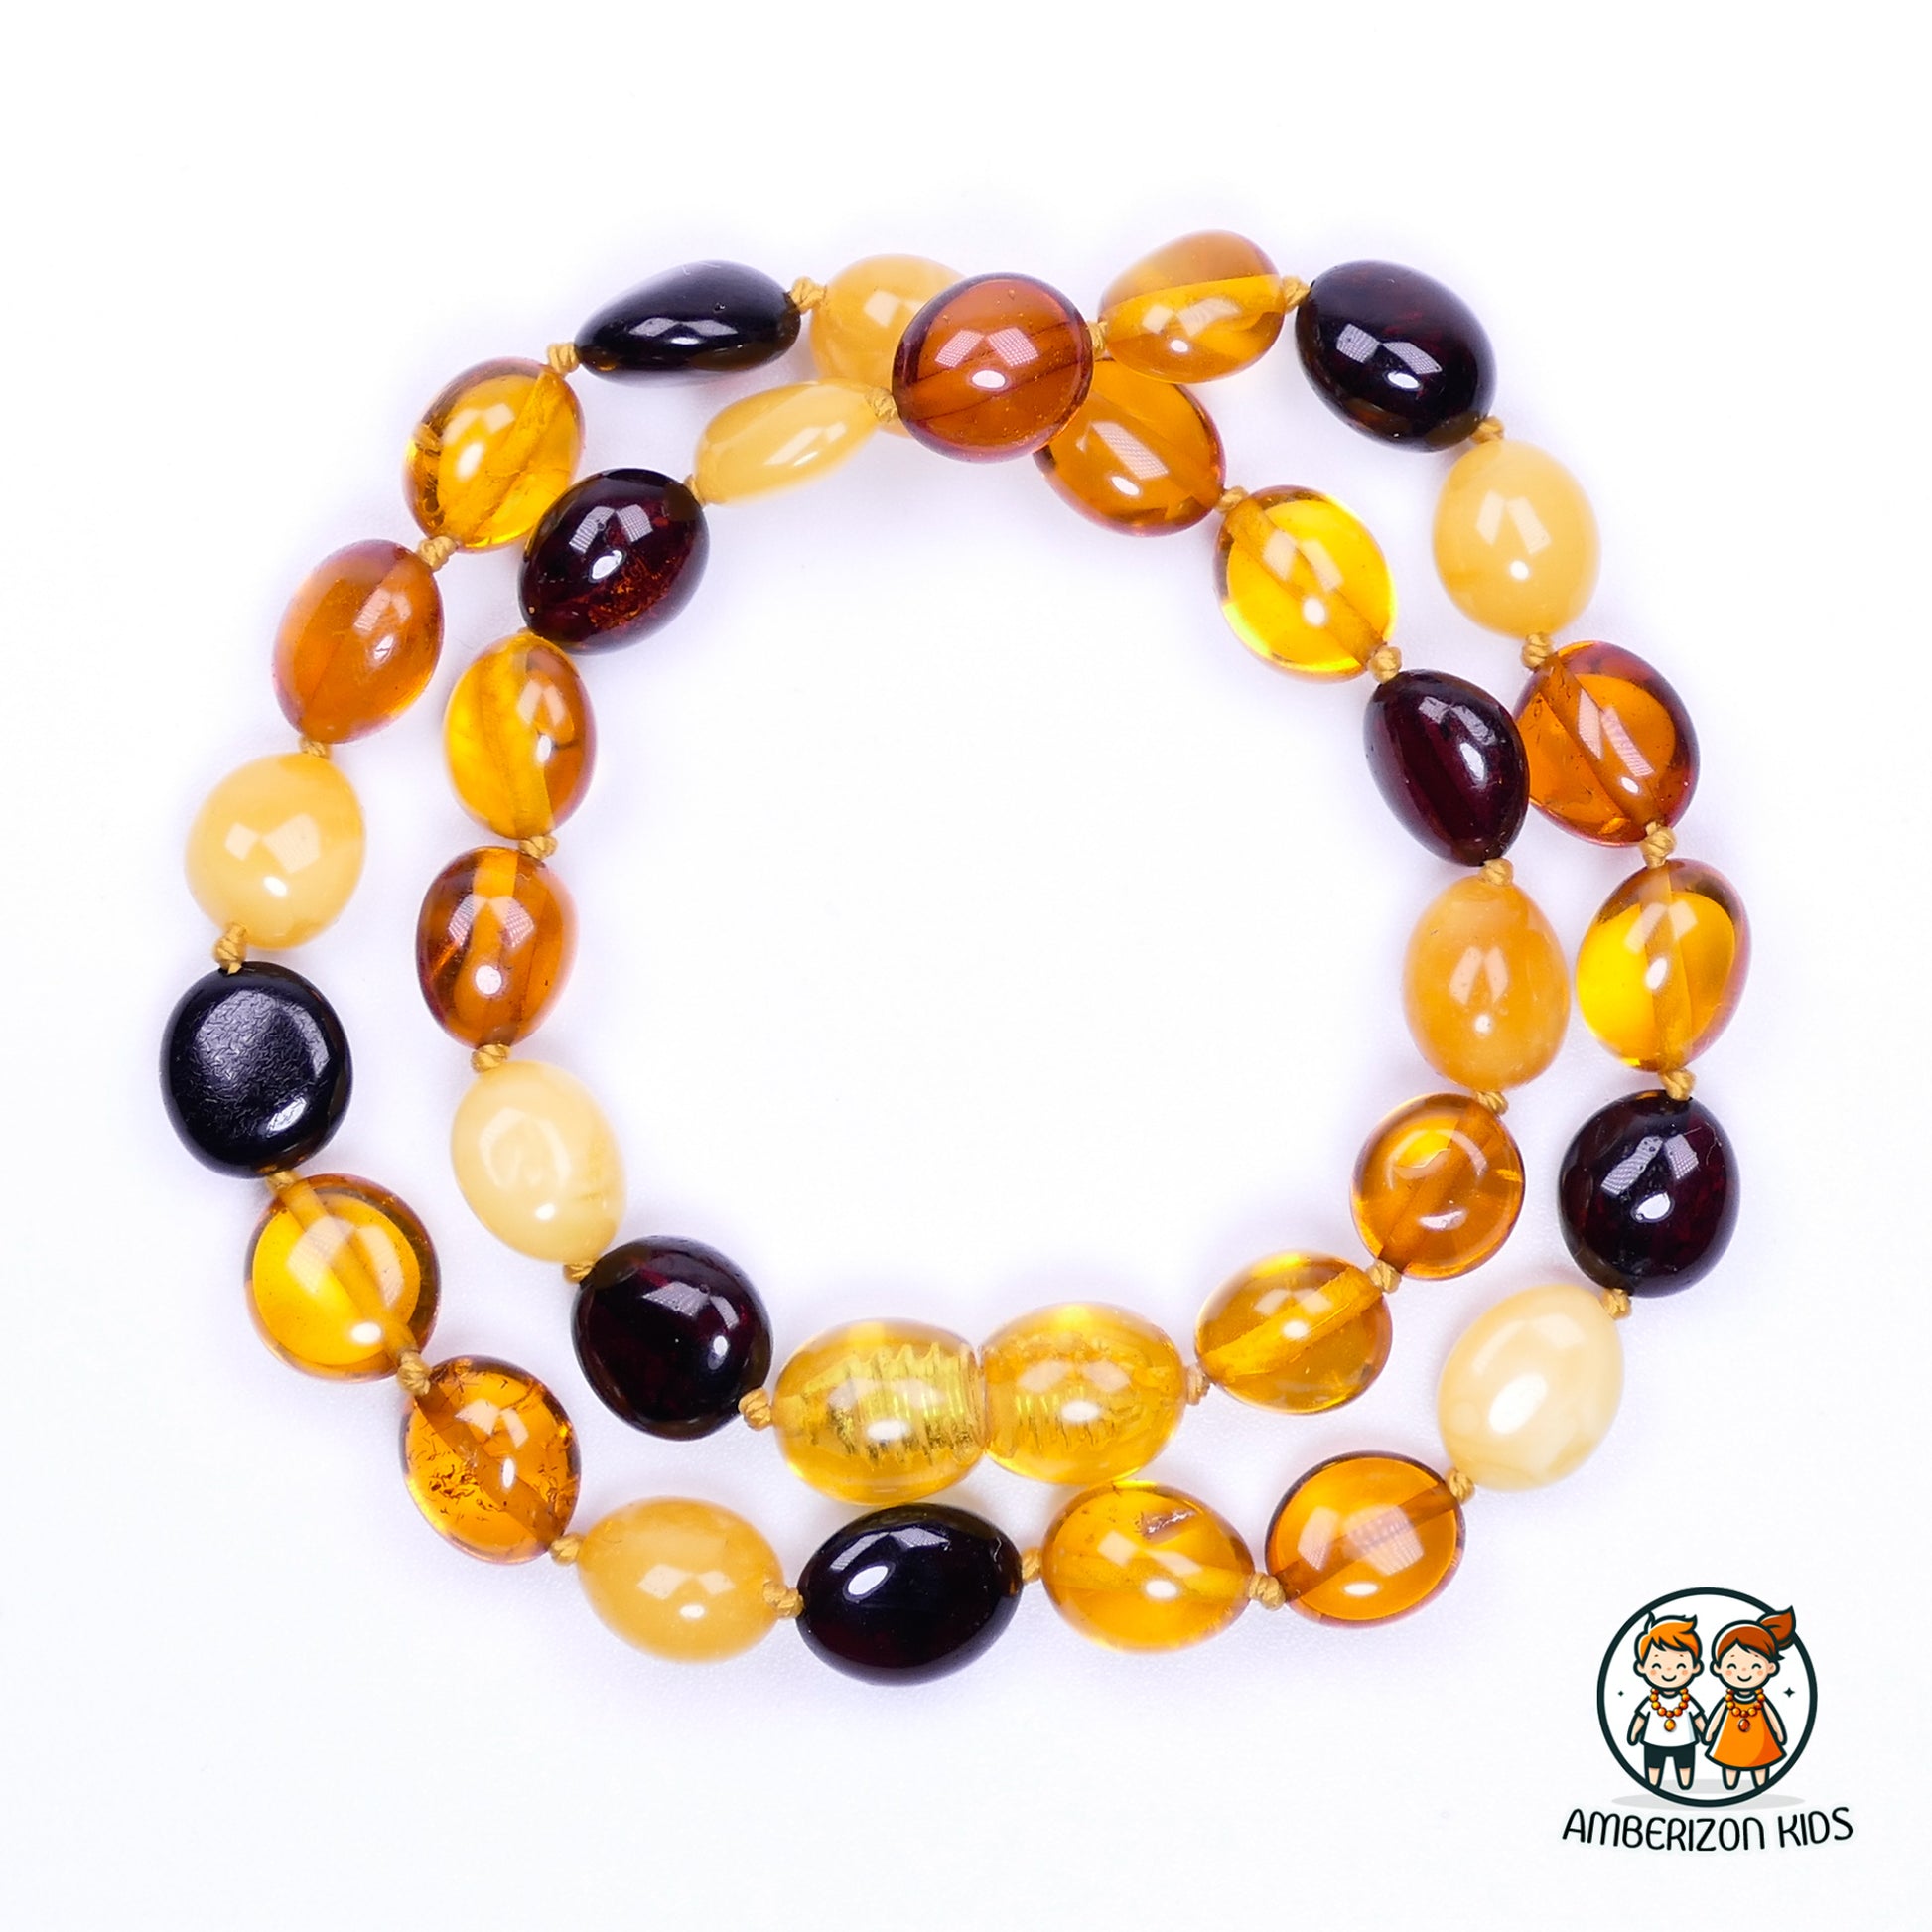 Premium polished Baltic amber baby necklace - Unisex - Large clear translucent multicolored beads